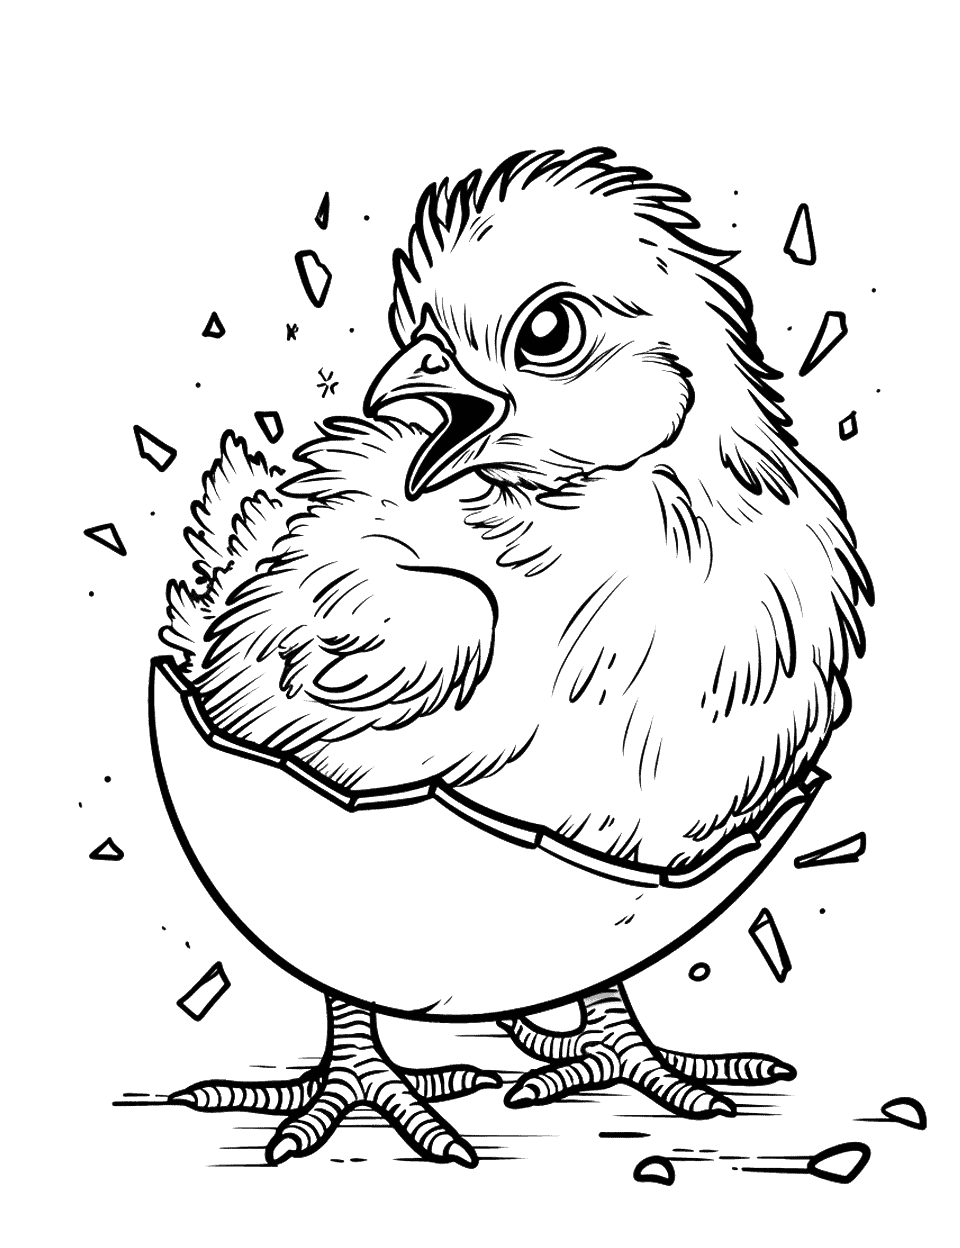 Chick Breaking Out of an Egg Chicken Coloring Page - A dynamic scene with a chick energetically breaking out of its eggshell.